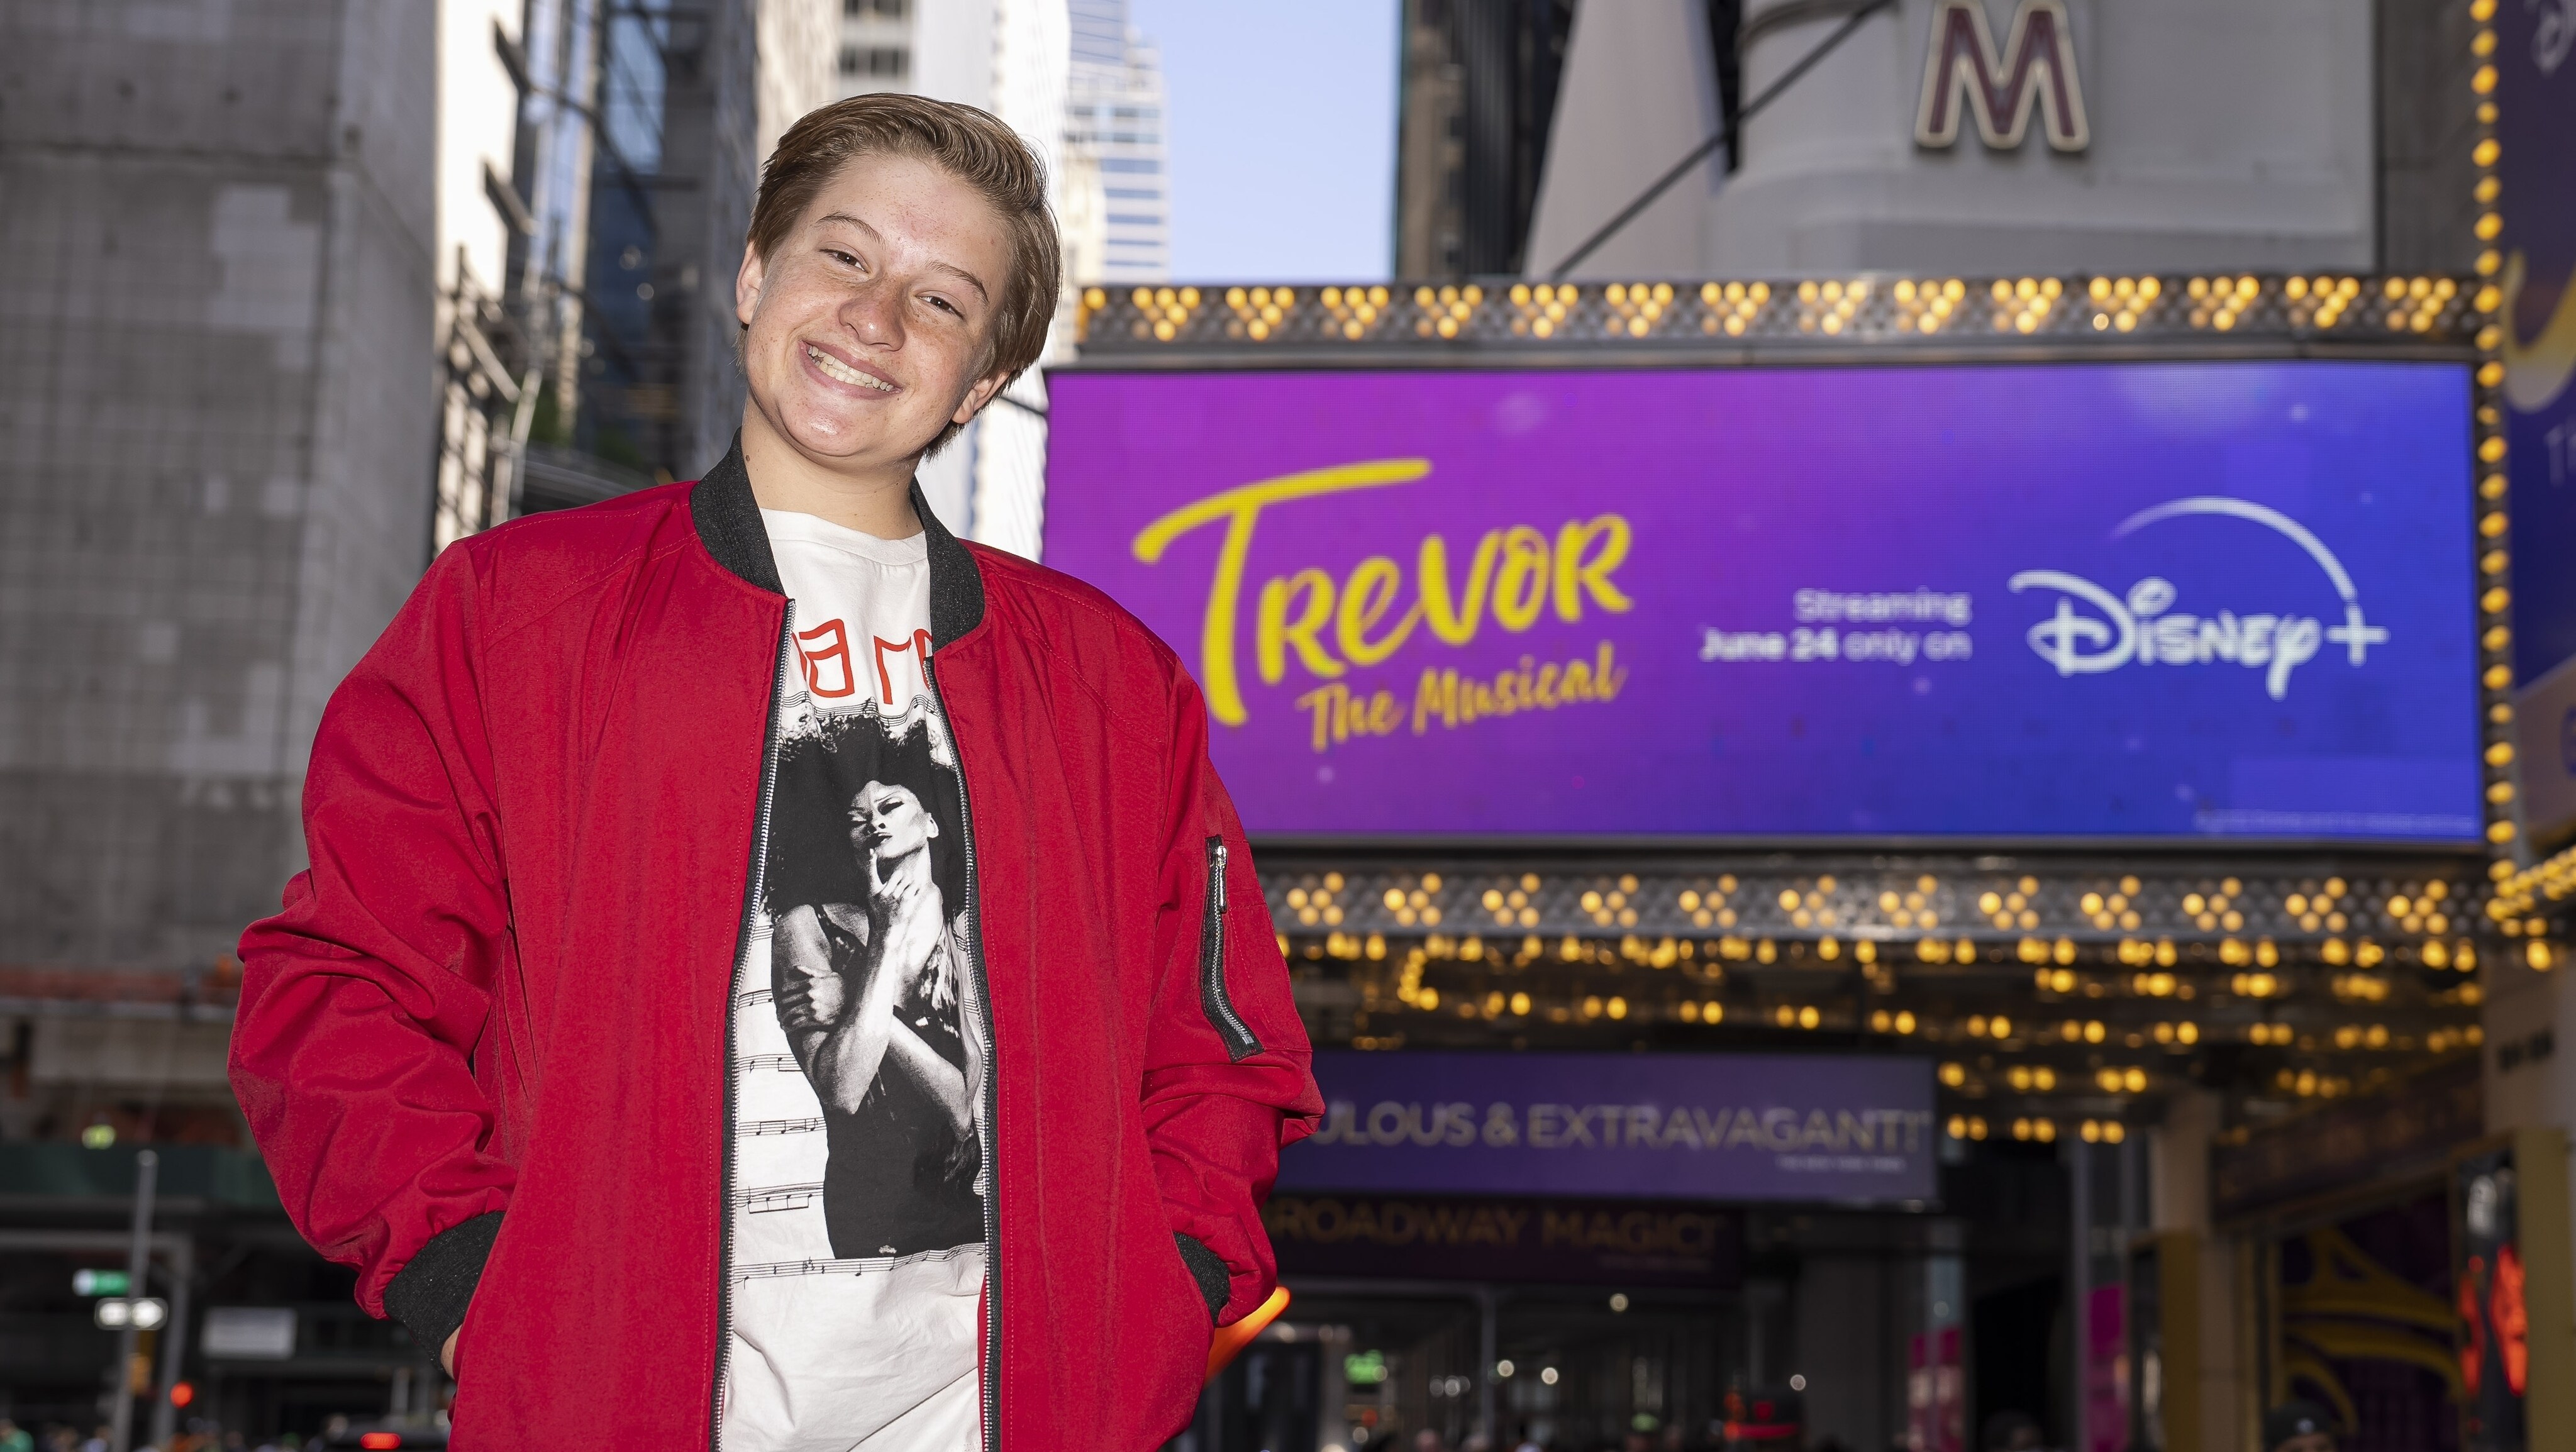 6/20/22: Disney+ “Trevor: The Musical” Photo-Op and Special Screening